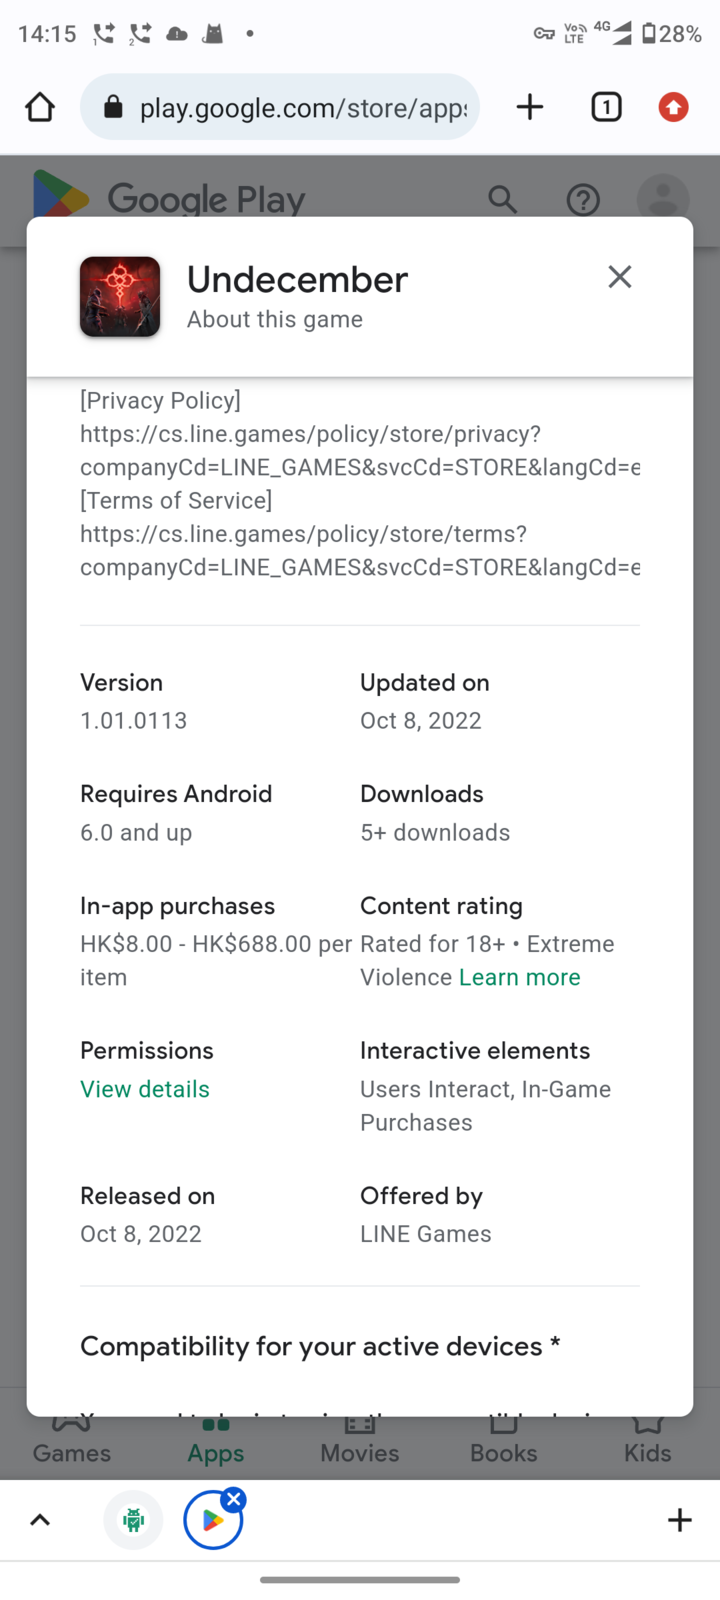 Undecember 2.14.0105 APK Download for Android (Latest Version)